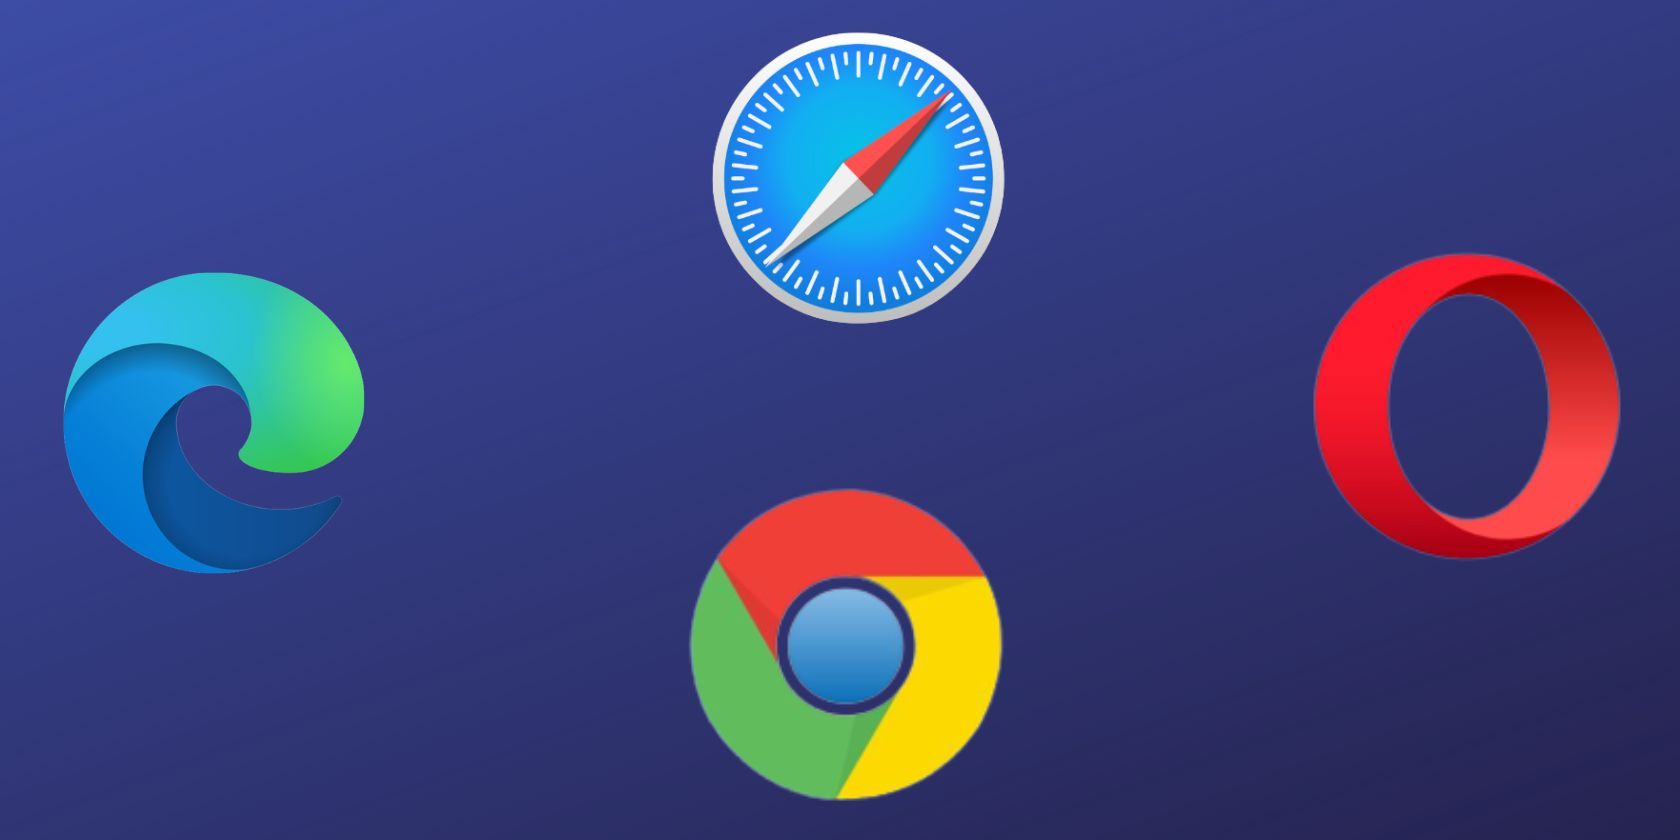 Useful Tips & Tools to Check If Your Browser Is Safe and Private